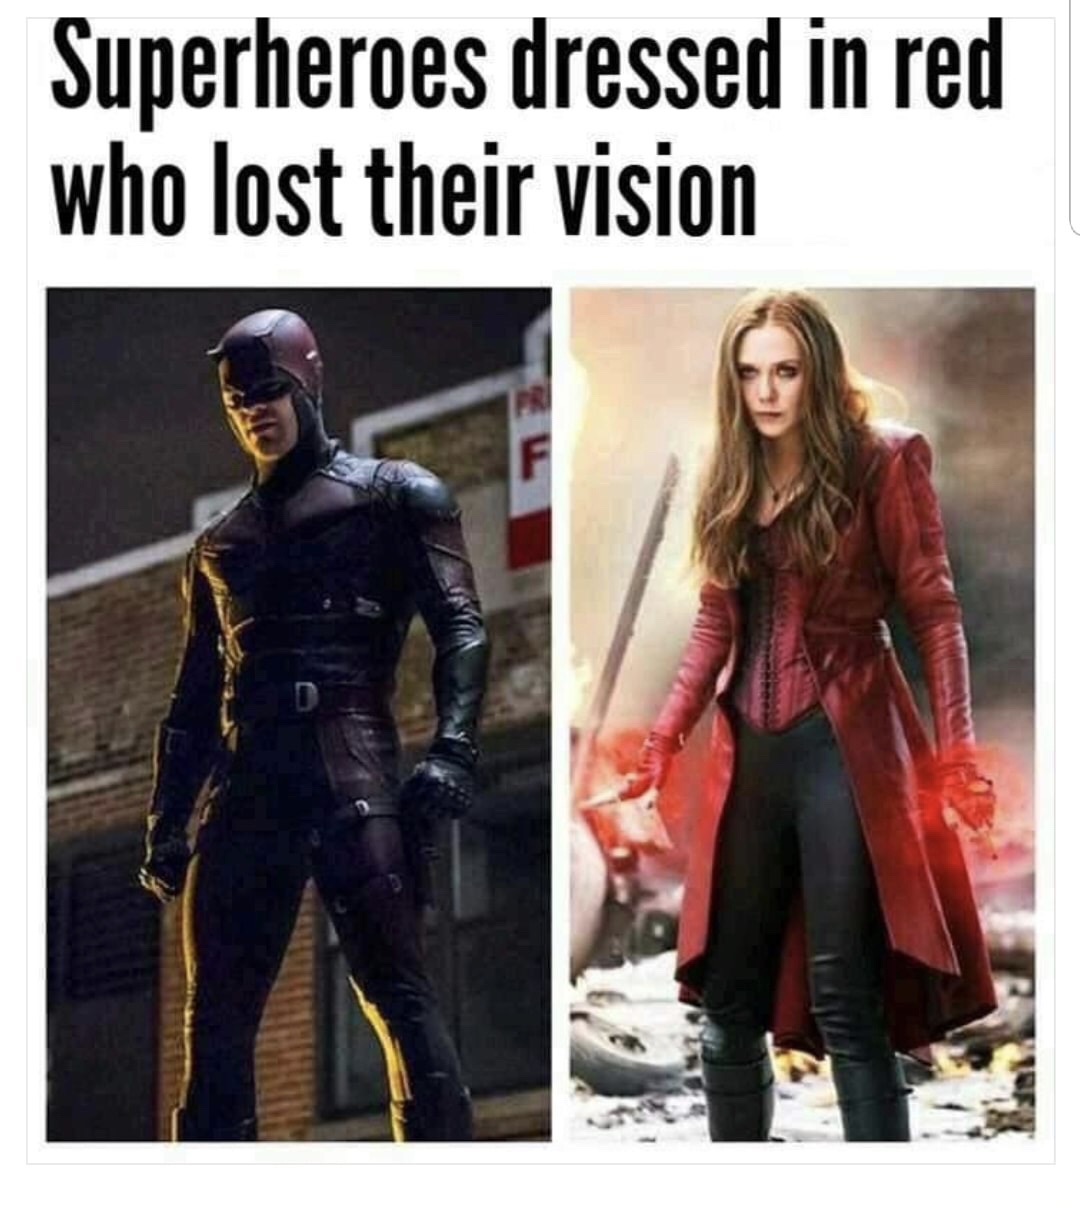 superheroes dressed in red who lost their vision - Superheroes dressed in red who lost their vision Le